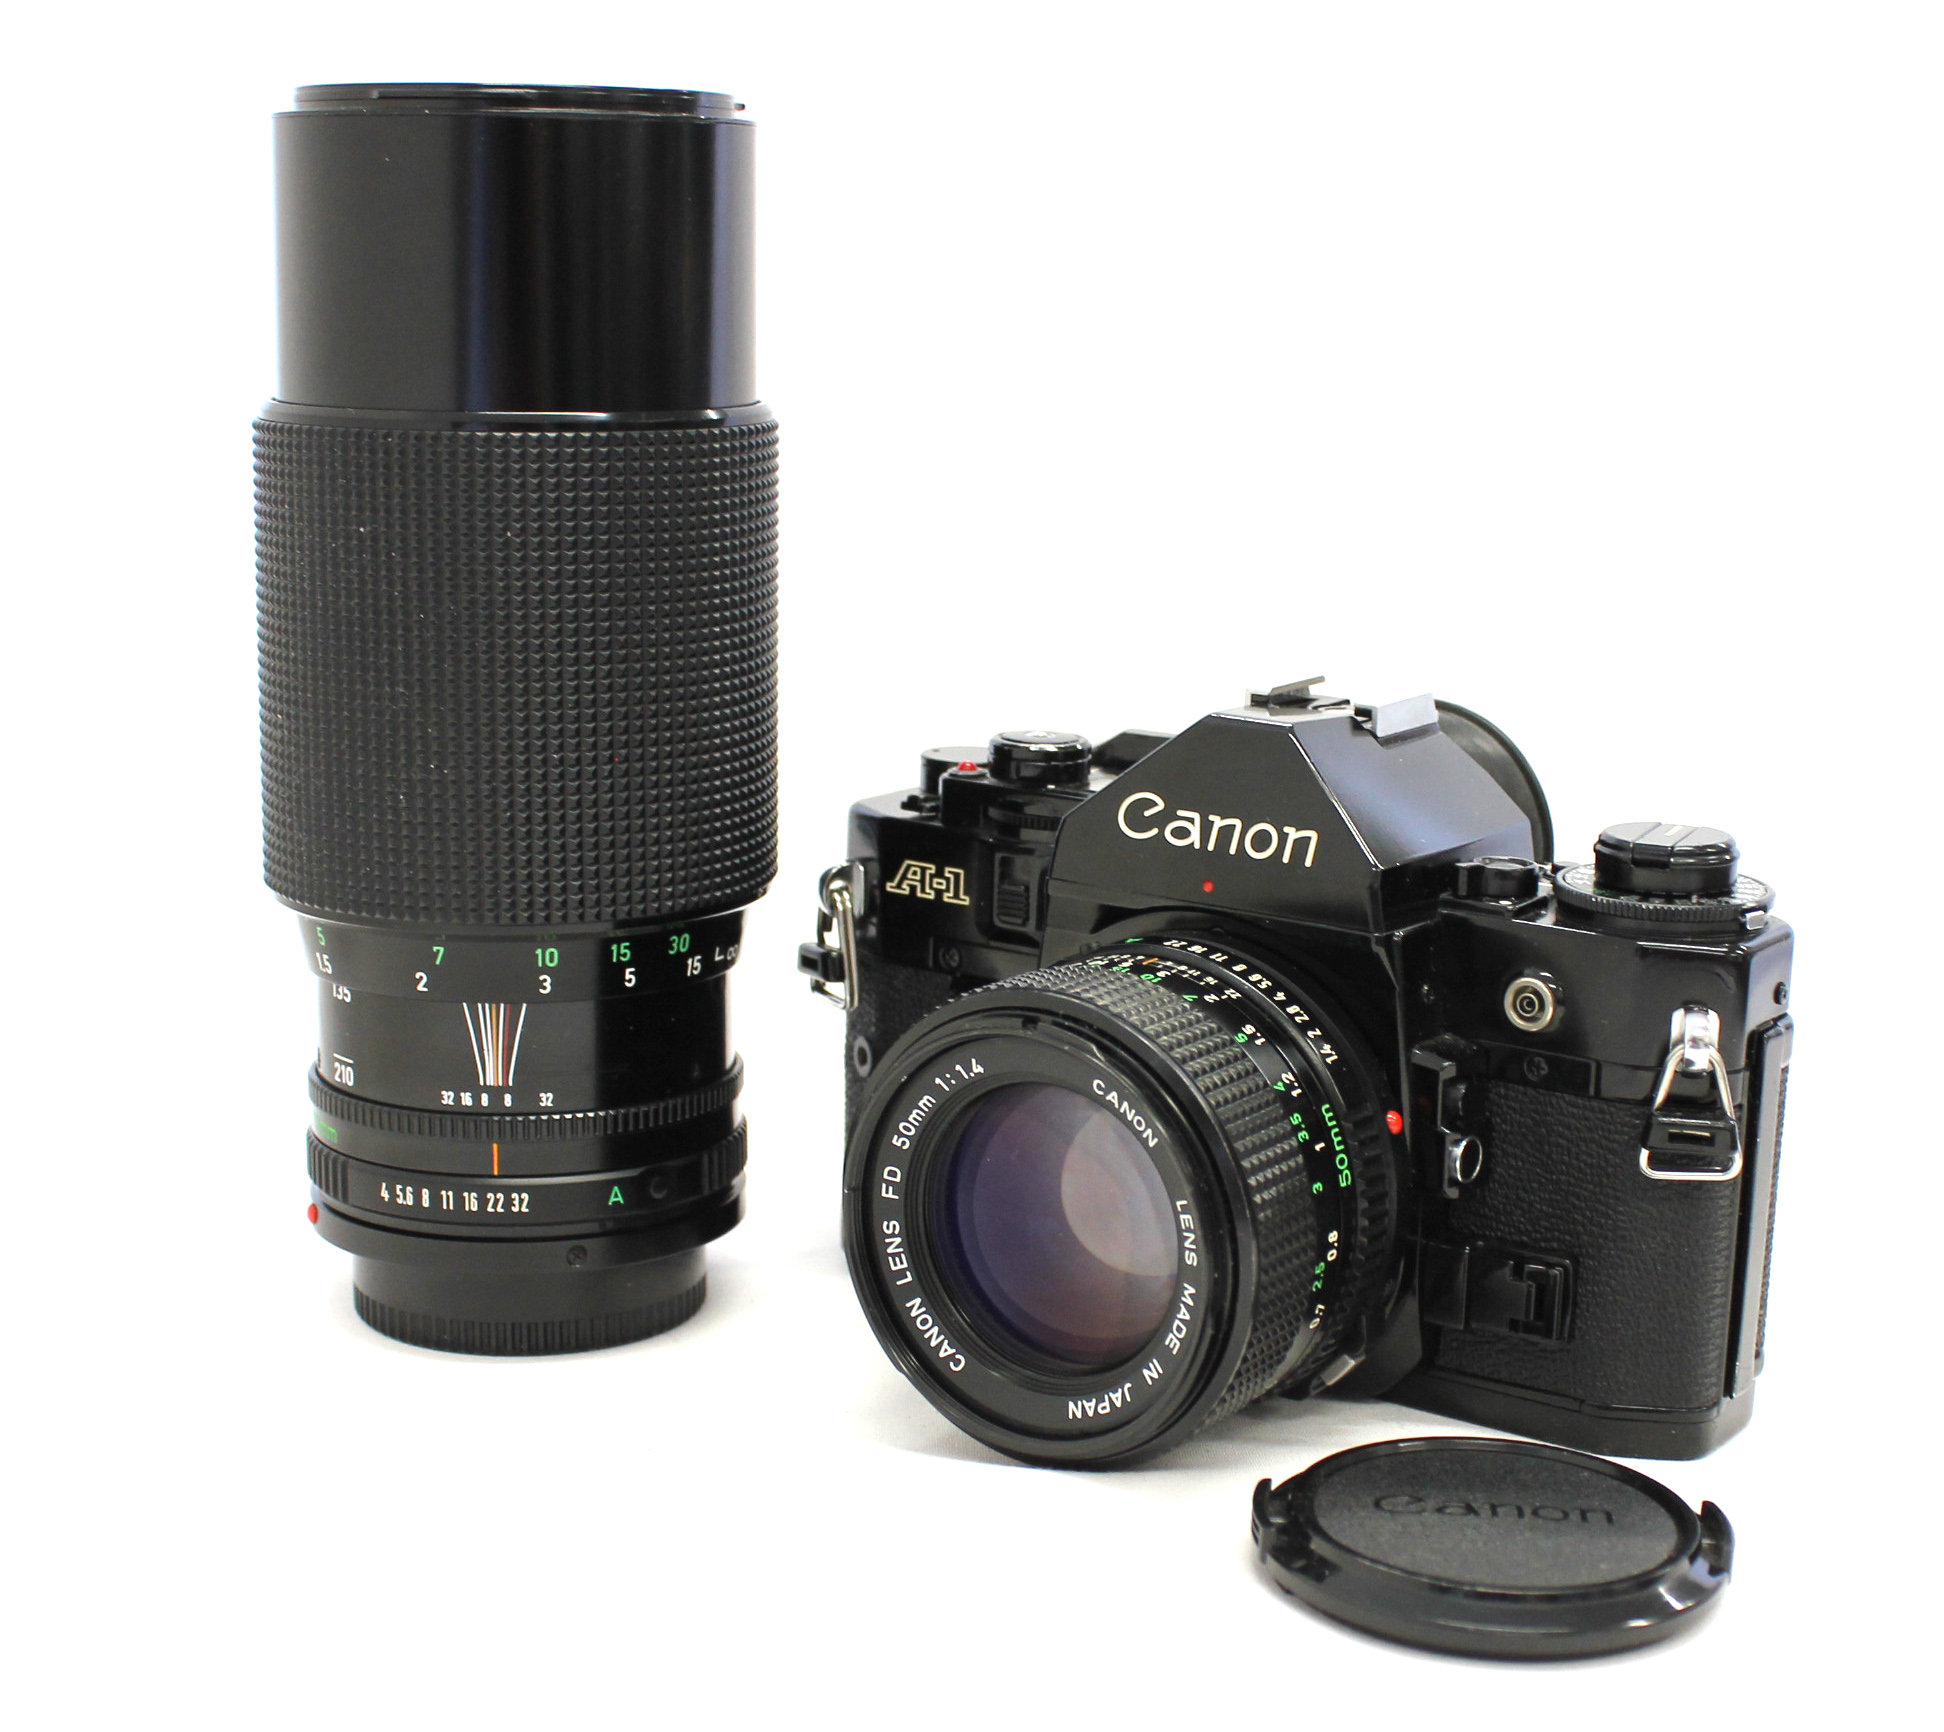 Japan Used Camera Shop | Canon A-1 35mm SLR Film Camera with New FD 50mm F/1.4 Lens & 70-210mm F/4 from Japan